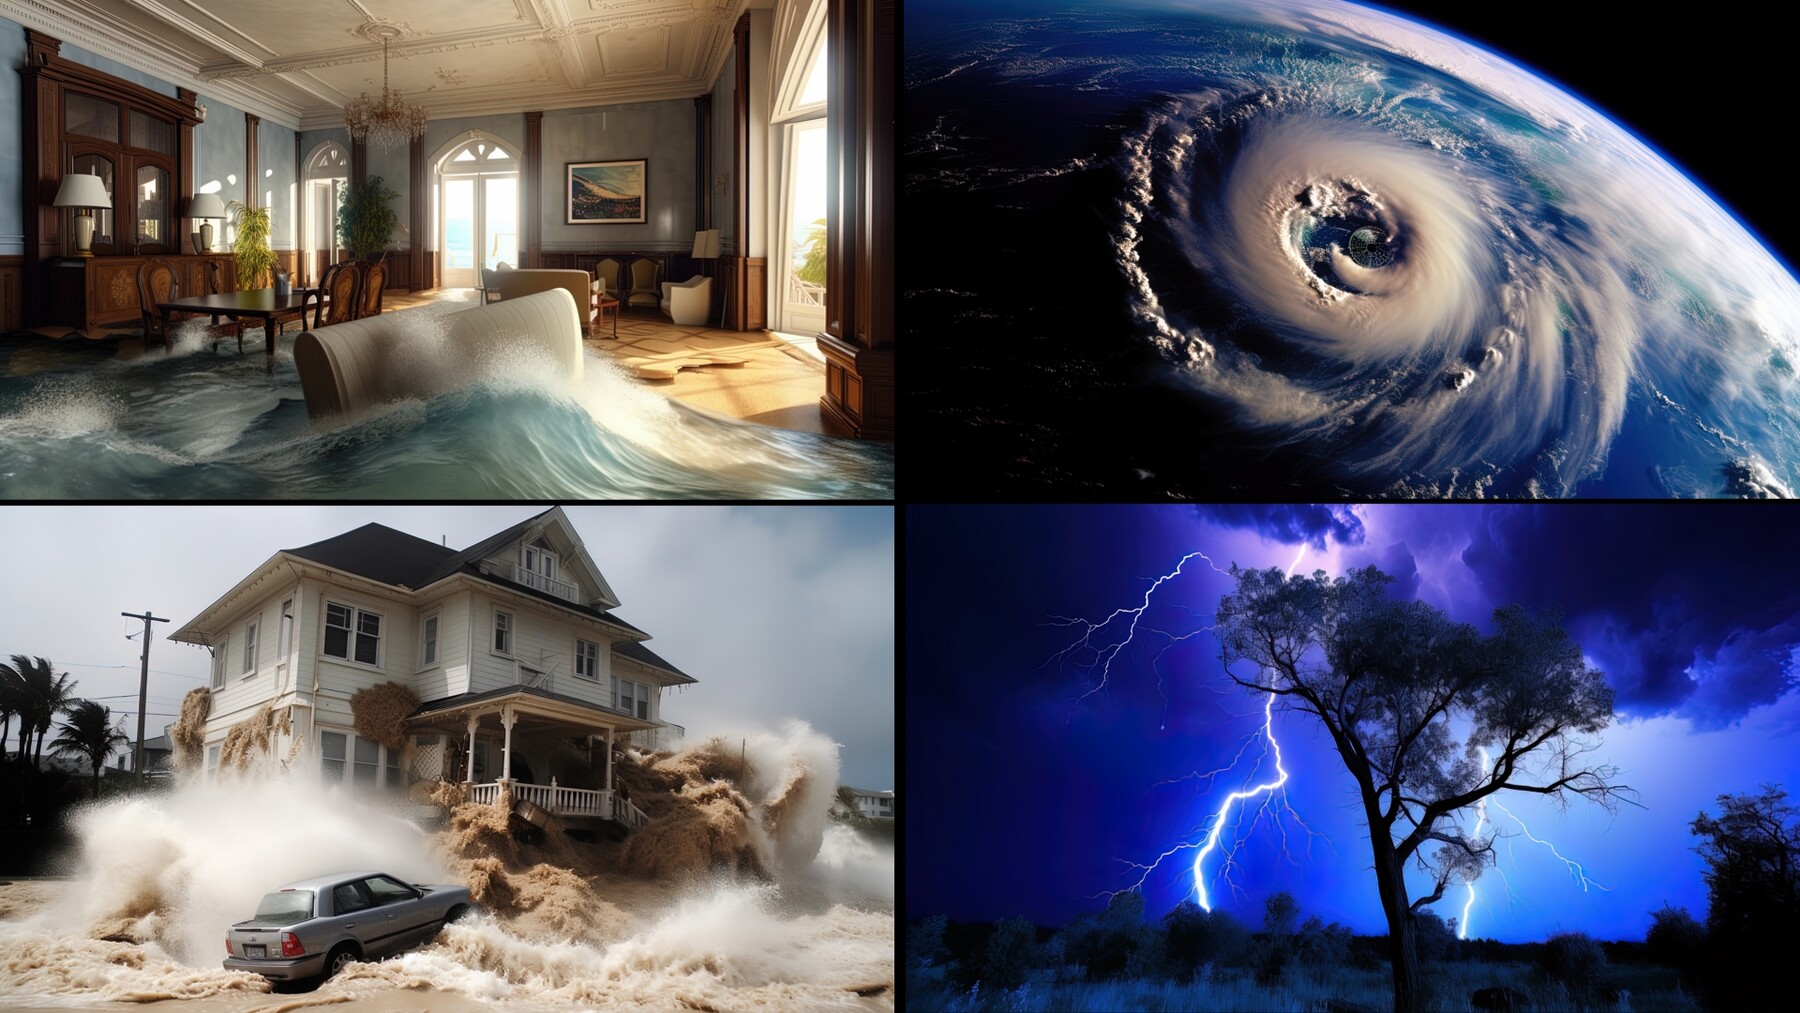 943 Natural Disasters Collage Images, Stock Photos & Vectors | Shutterstock